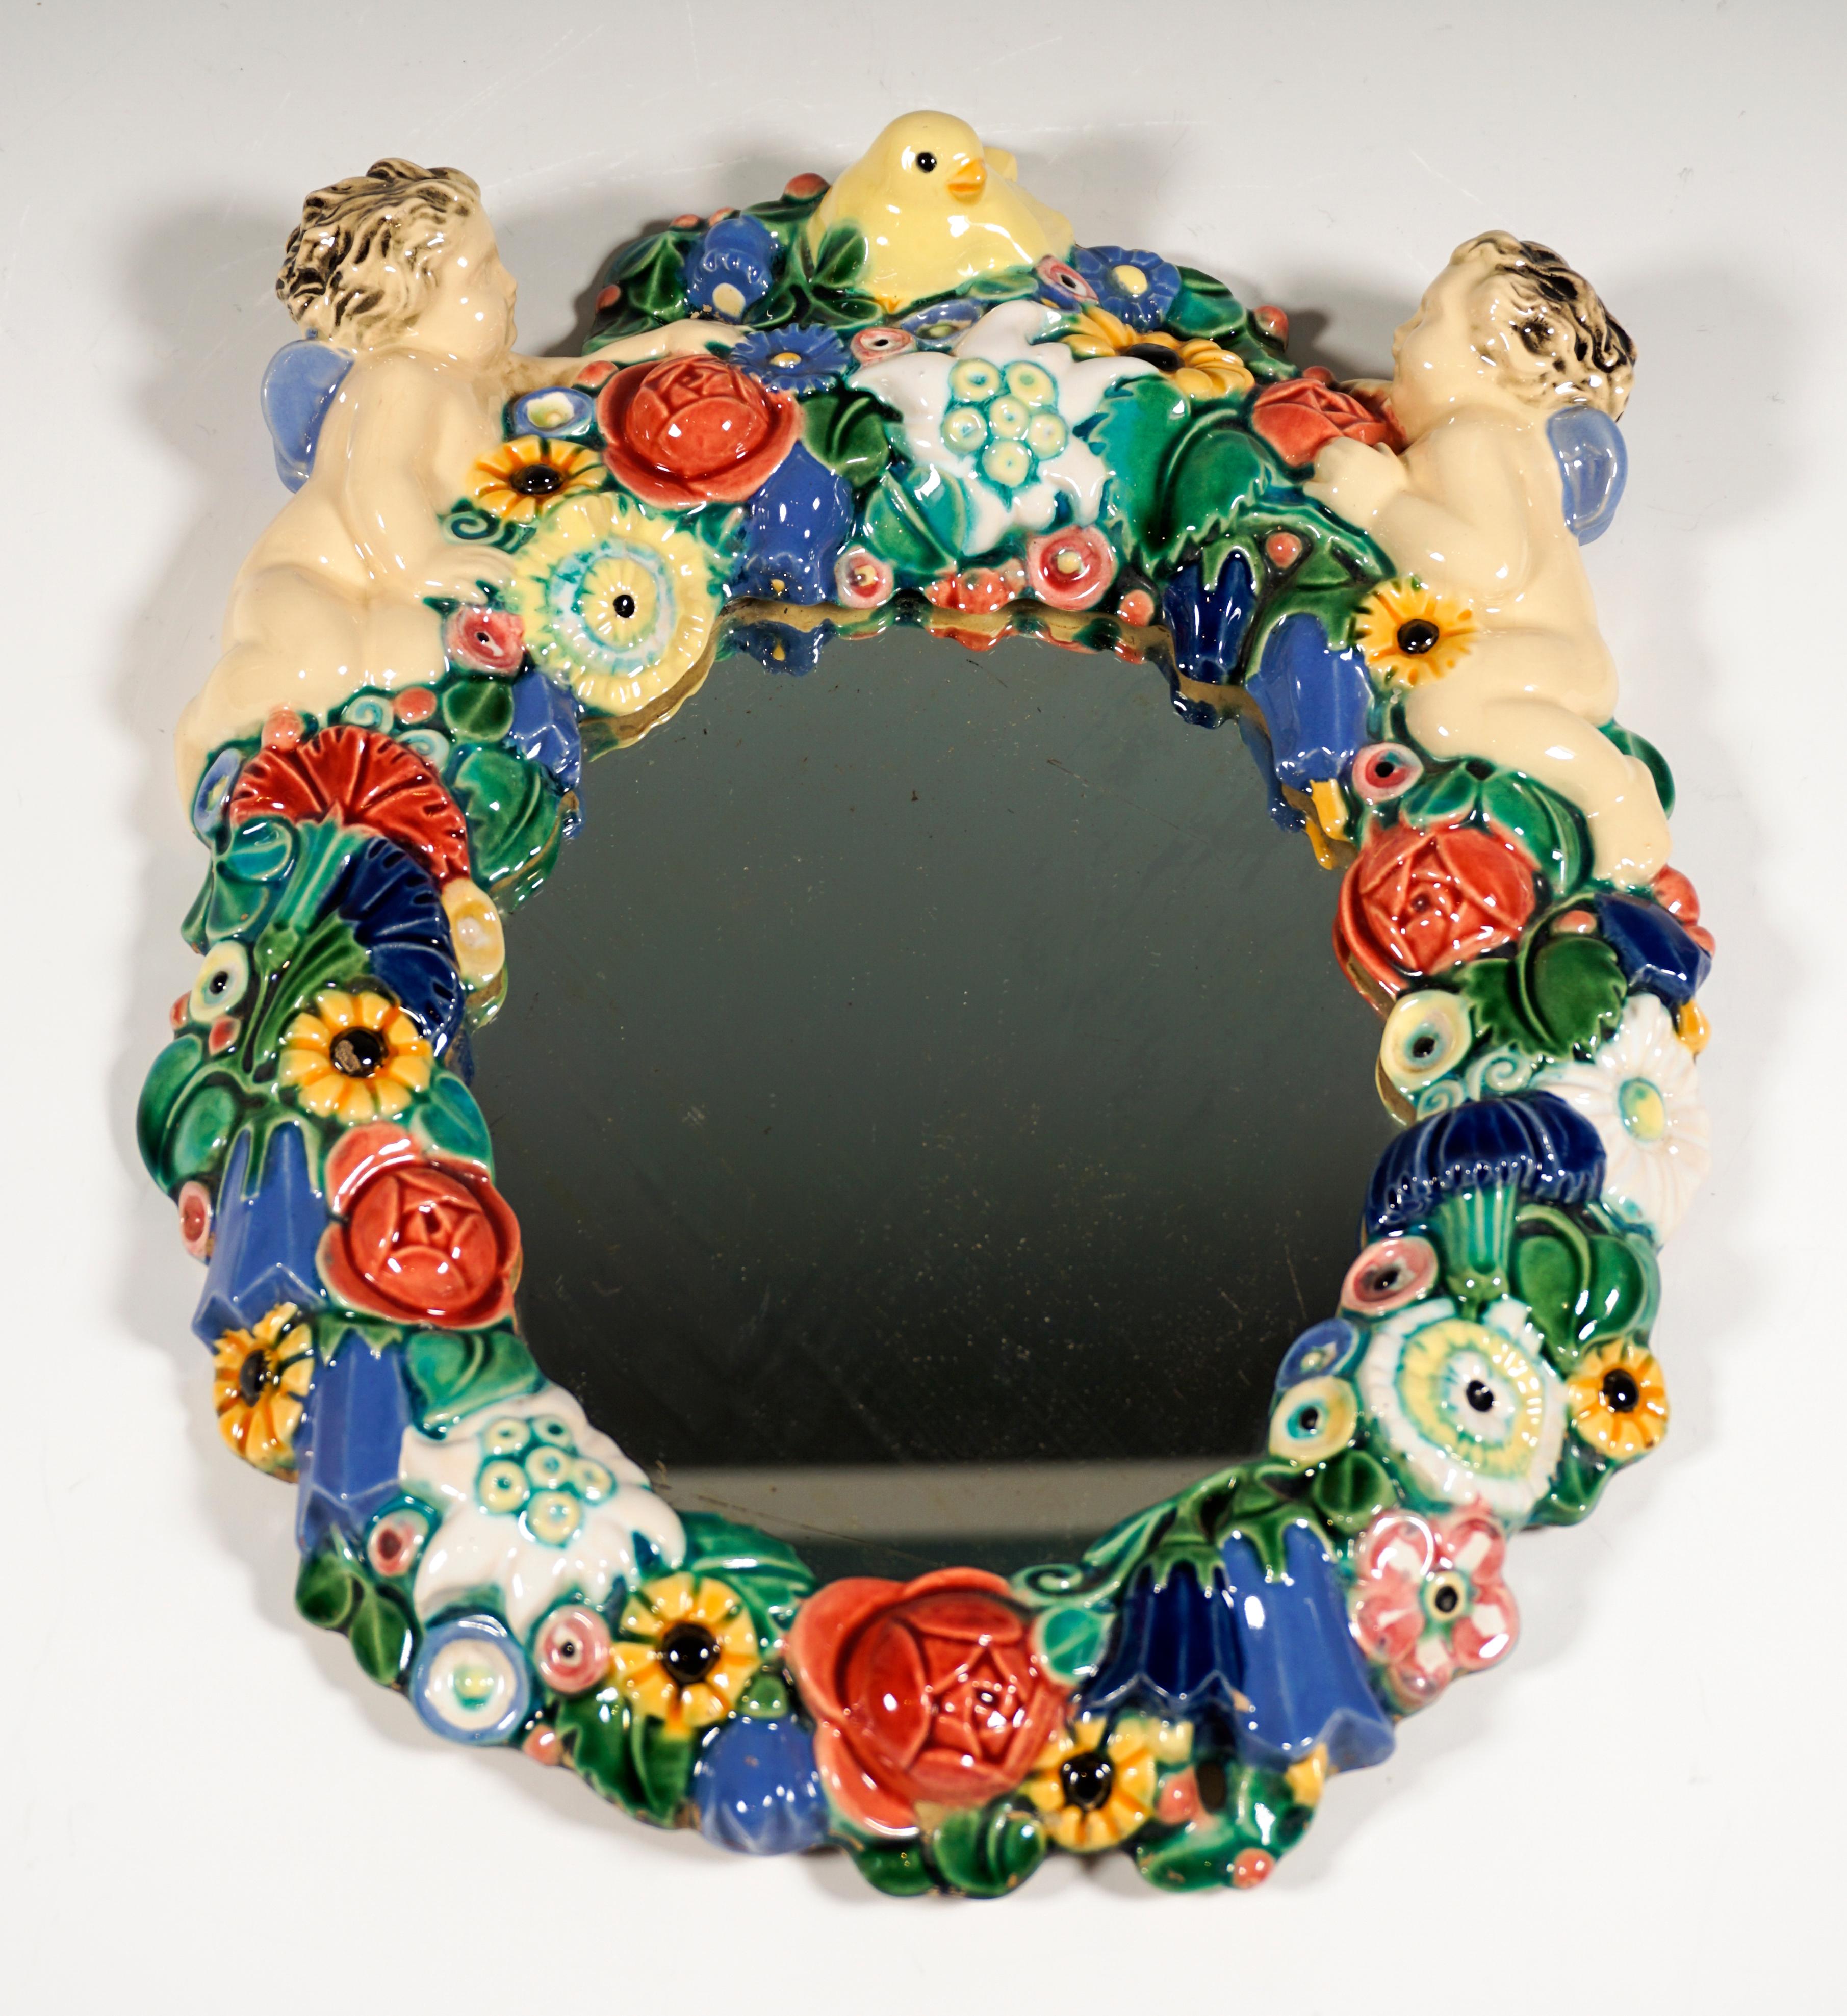 Austrian Art Nouveau Wall Mirror With Flowers And Cupids by Michael Powolny Vienna c 1913 For Sale